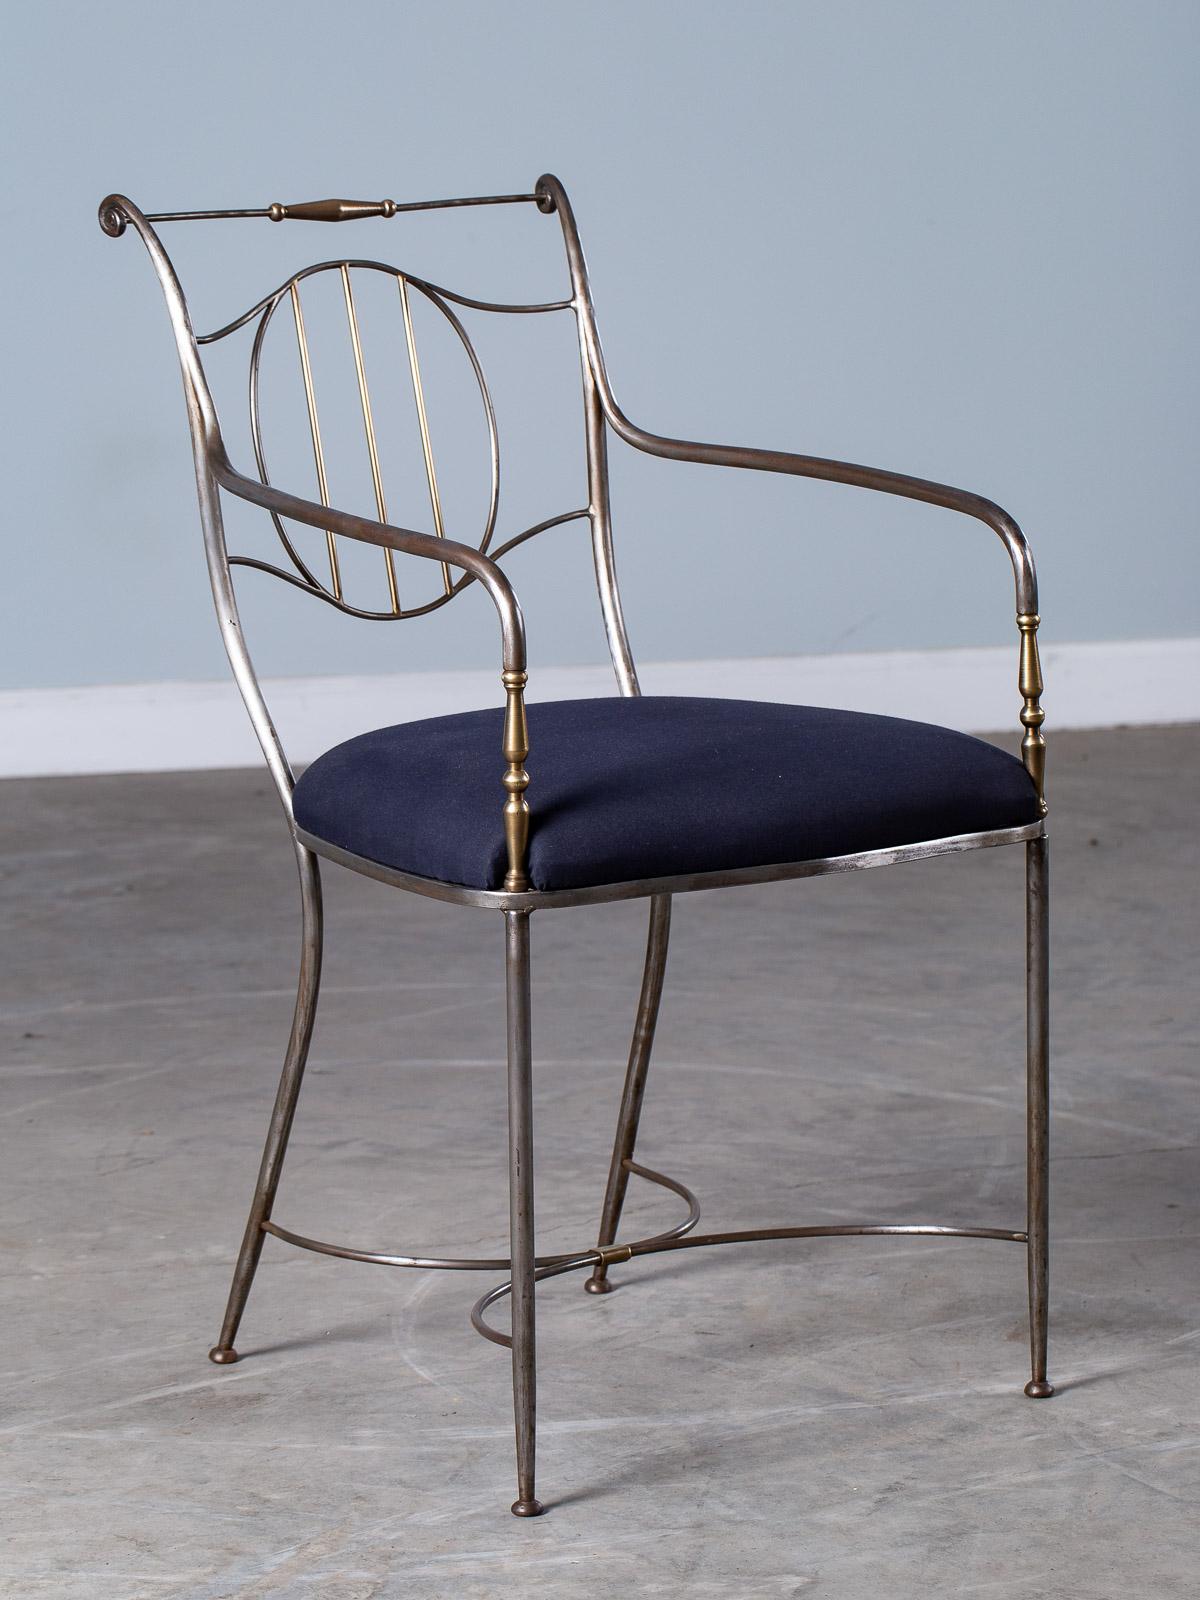 A stylish vintage French steel and brass chair, circa 1940 with an upholstered seat. The wonderful sweep of the curved lines gives this chair its modern and contemporary quality. Modeled after chairs made two centuries ago this vintage steel chair